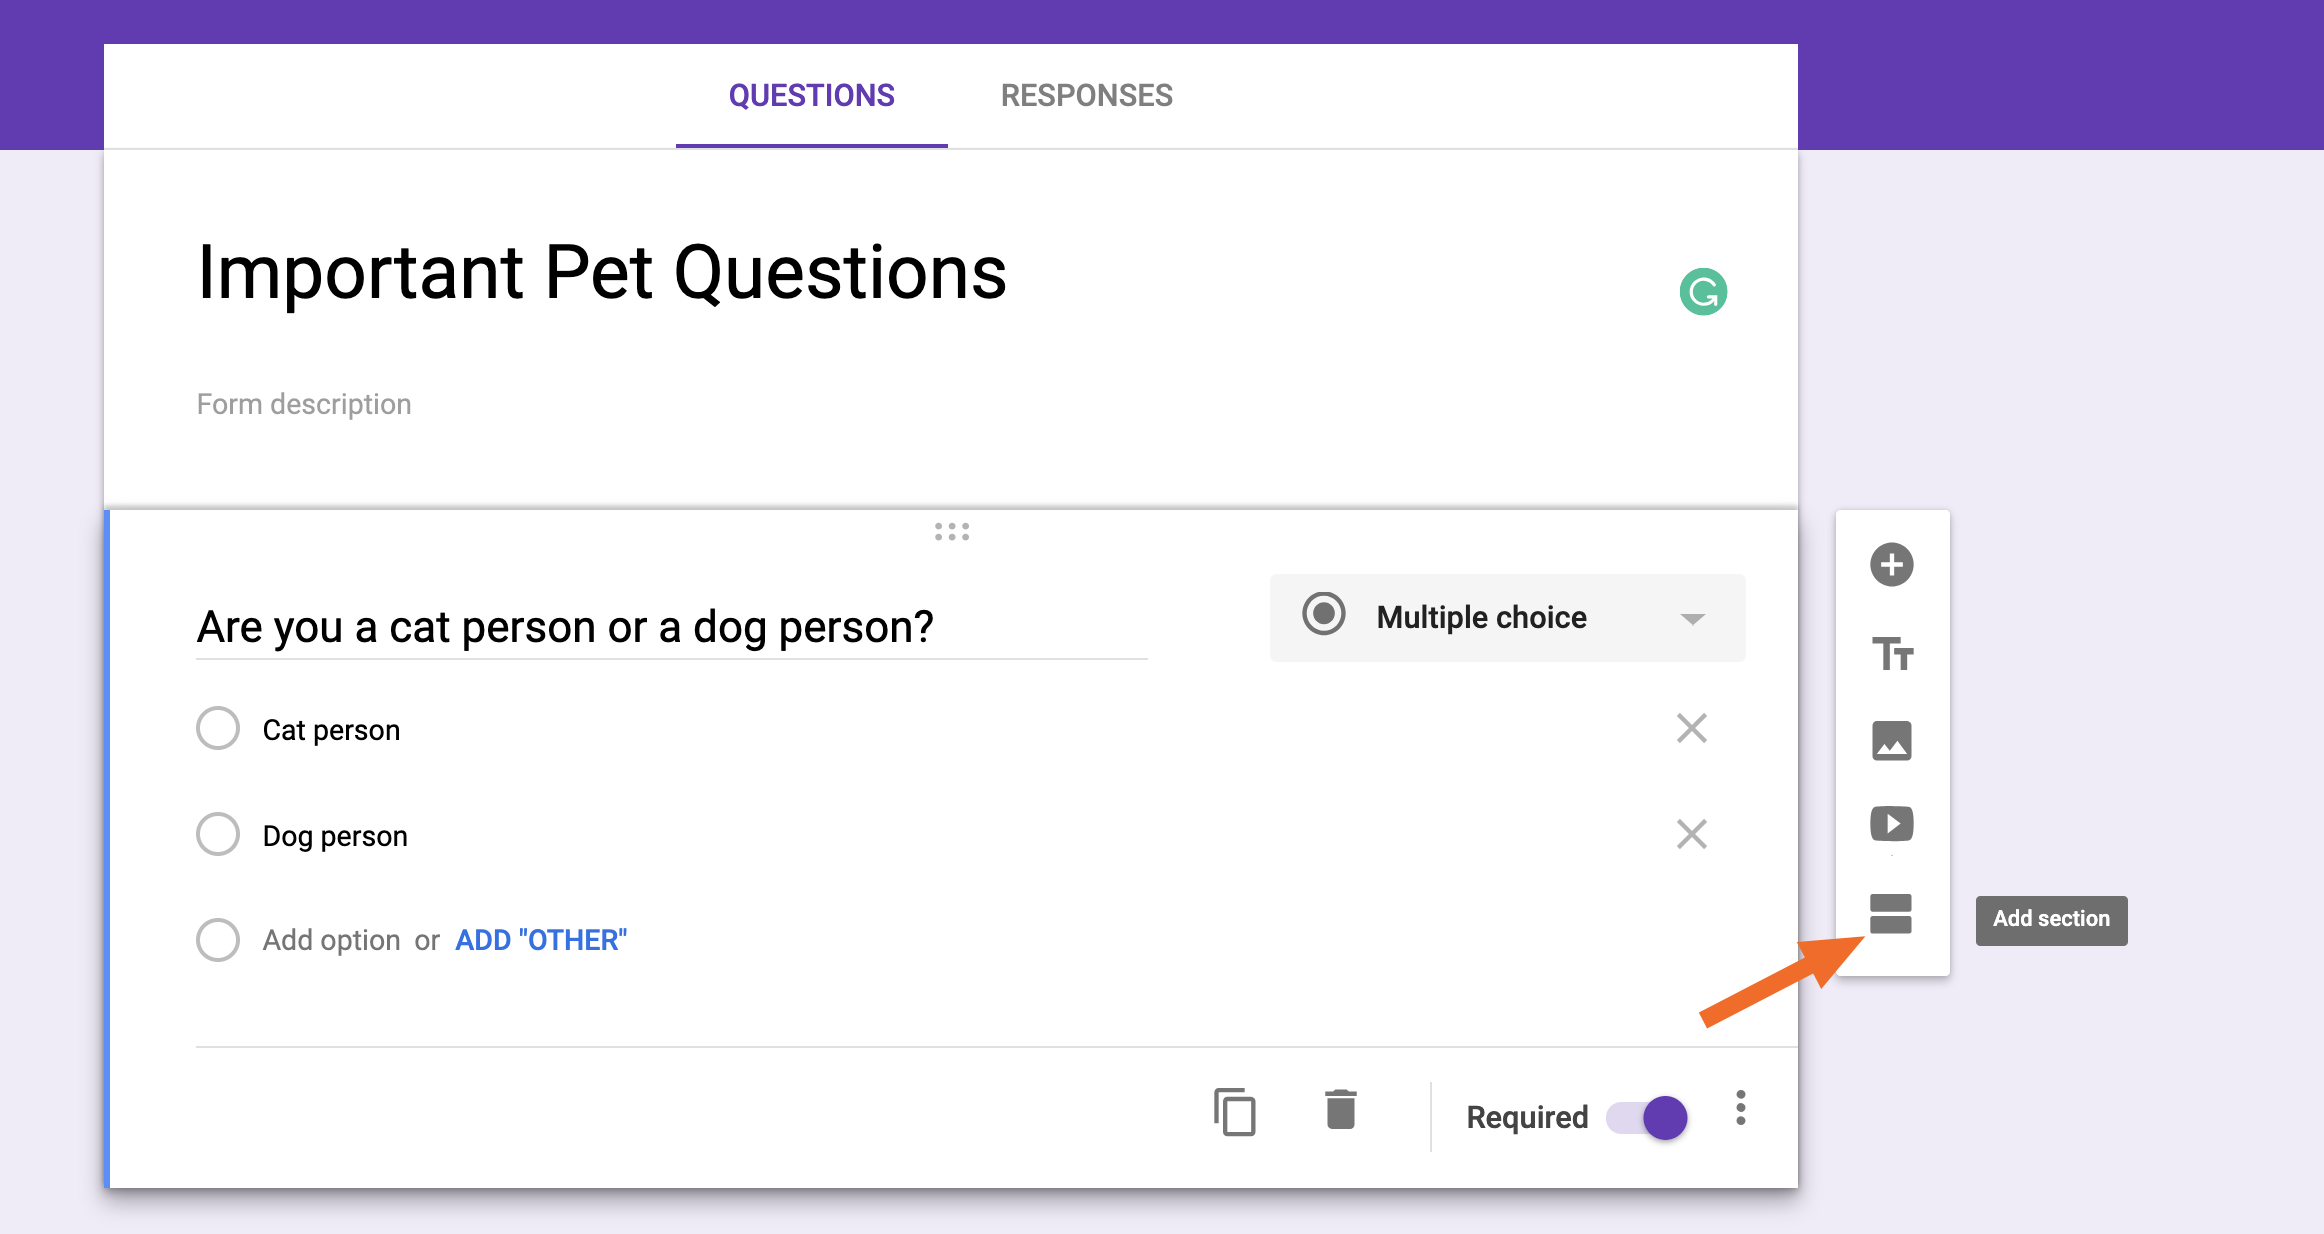 How to Create Form Sections and Logic in Google Forms